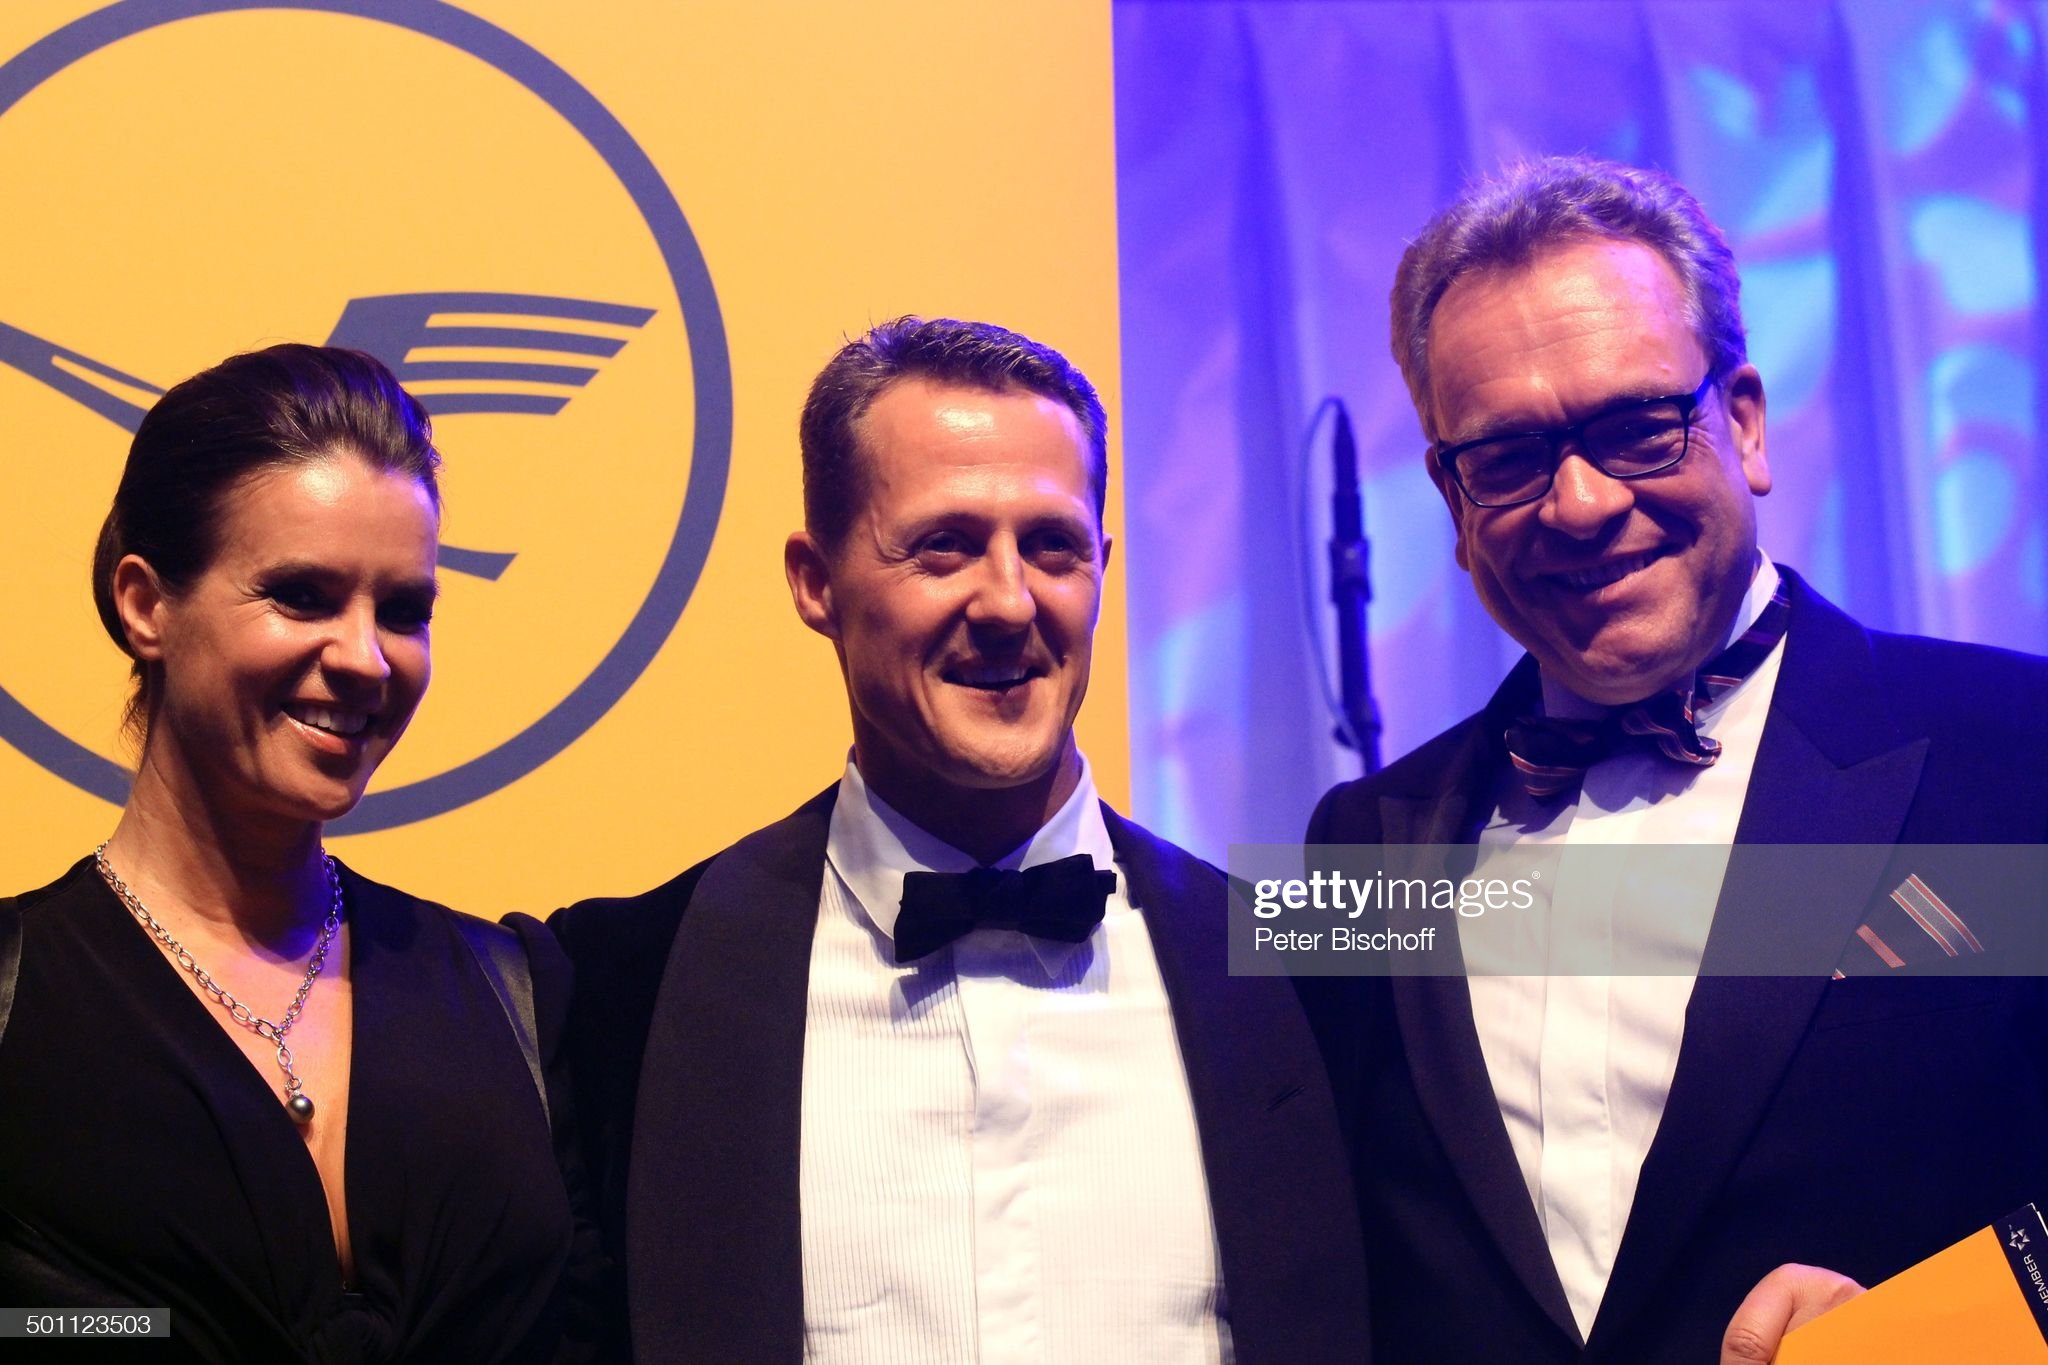 Michael Schumacher with the two-time Olympic champion Katarina (Kati) Witt and Stefan Lauer, a Lufthansa top manager, on 10 November 2012. 